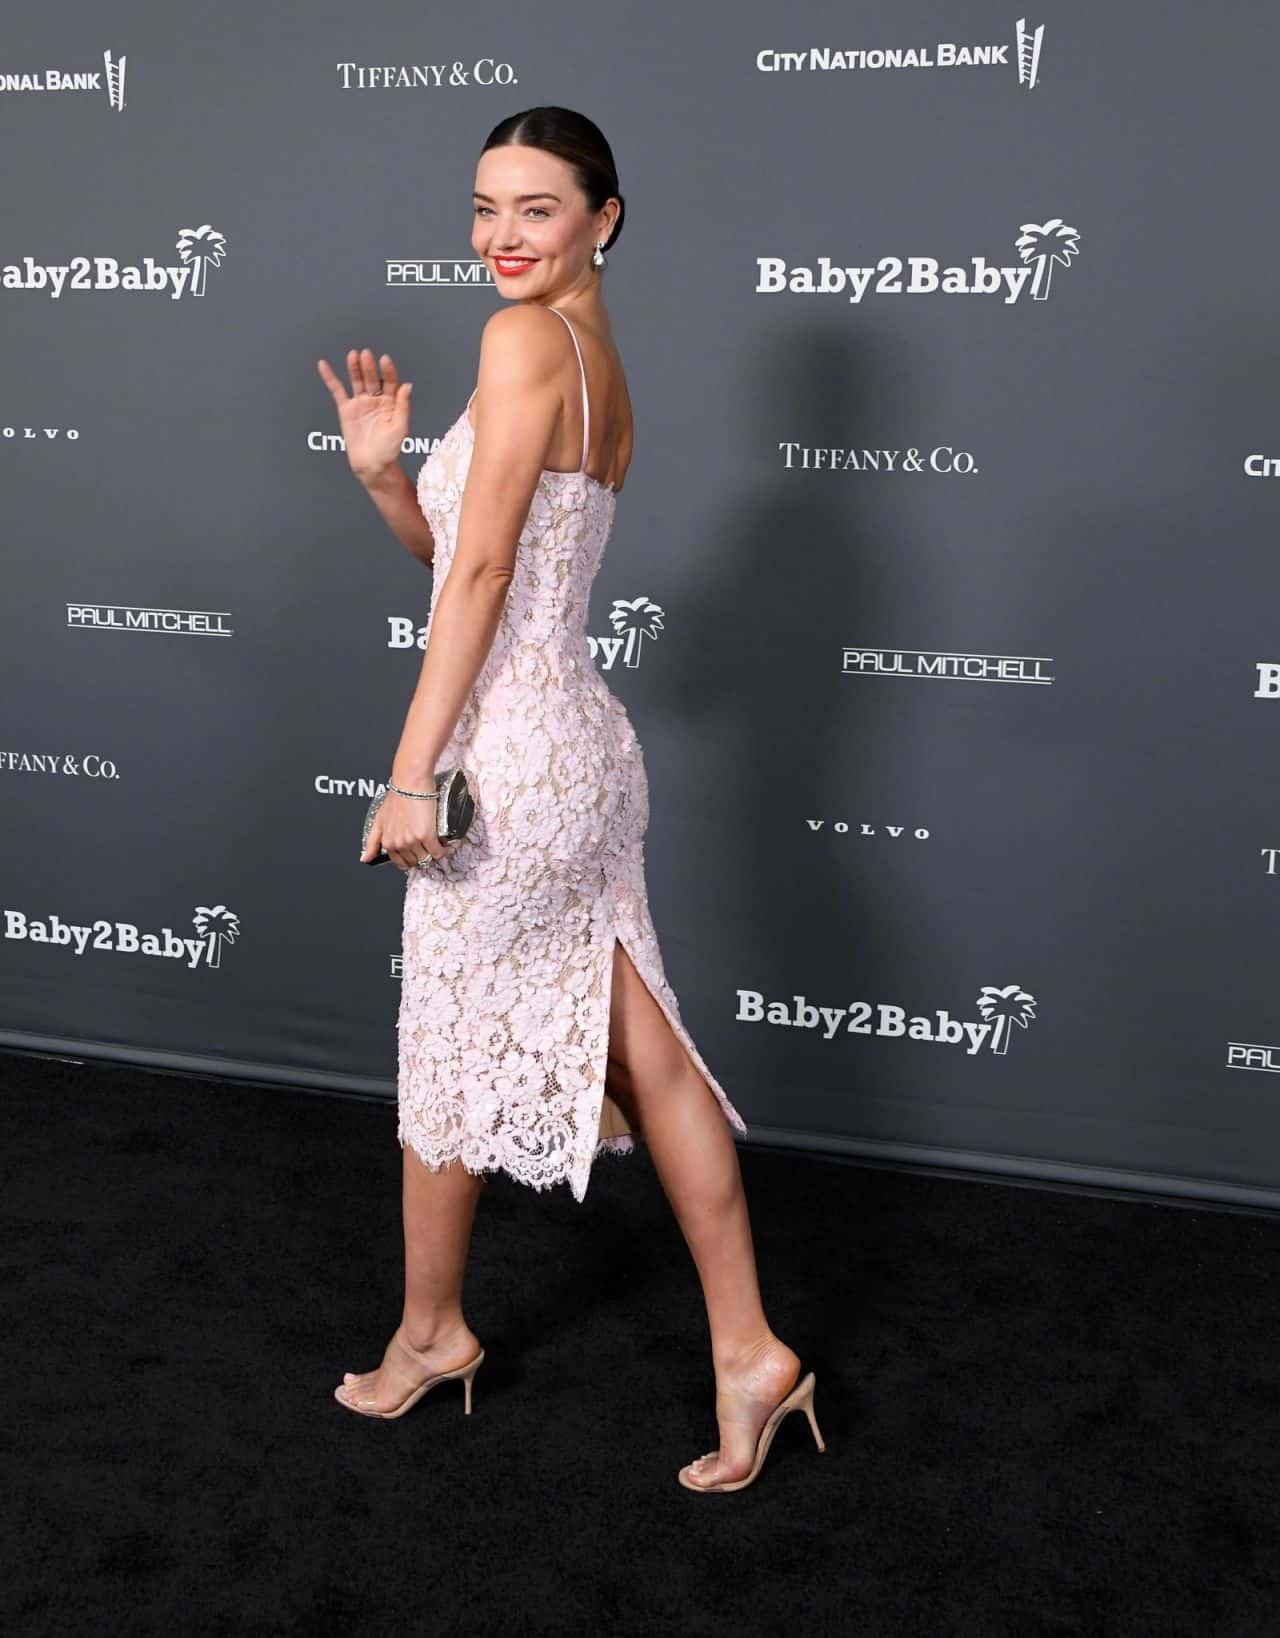 Miranda Kerr was a Vision of Beauty in a Pink Dress at the Baby2Baby Gala